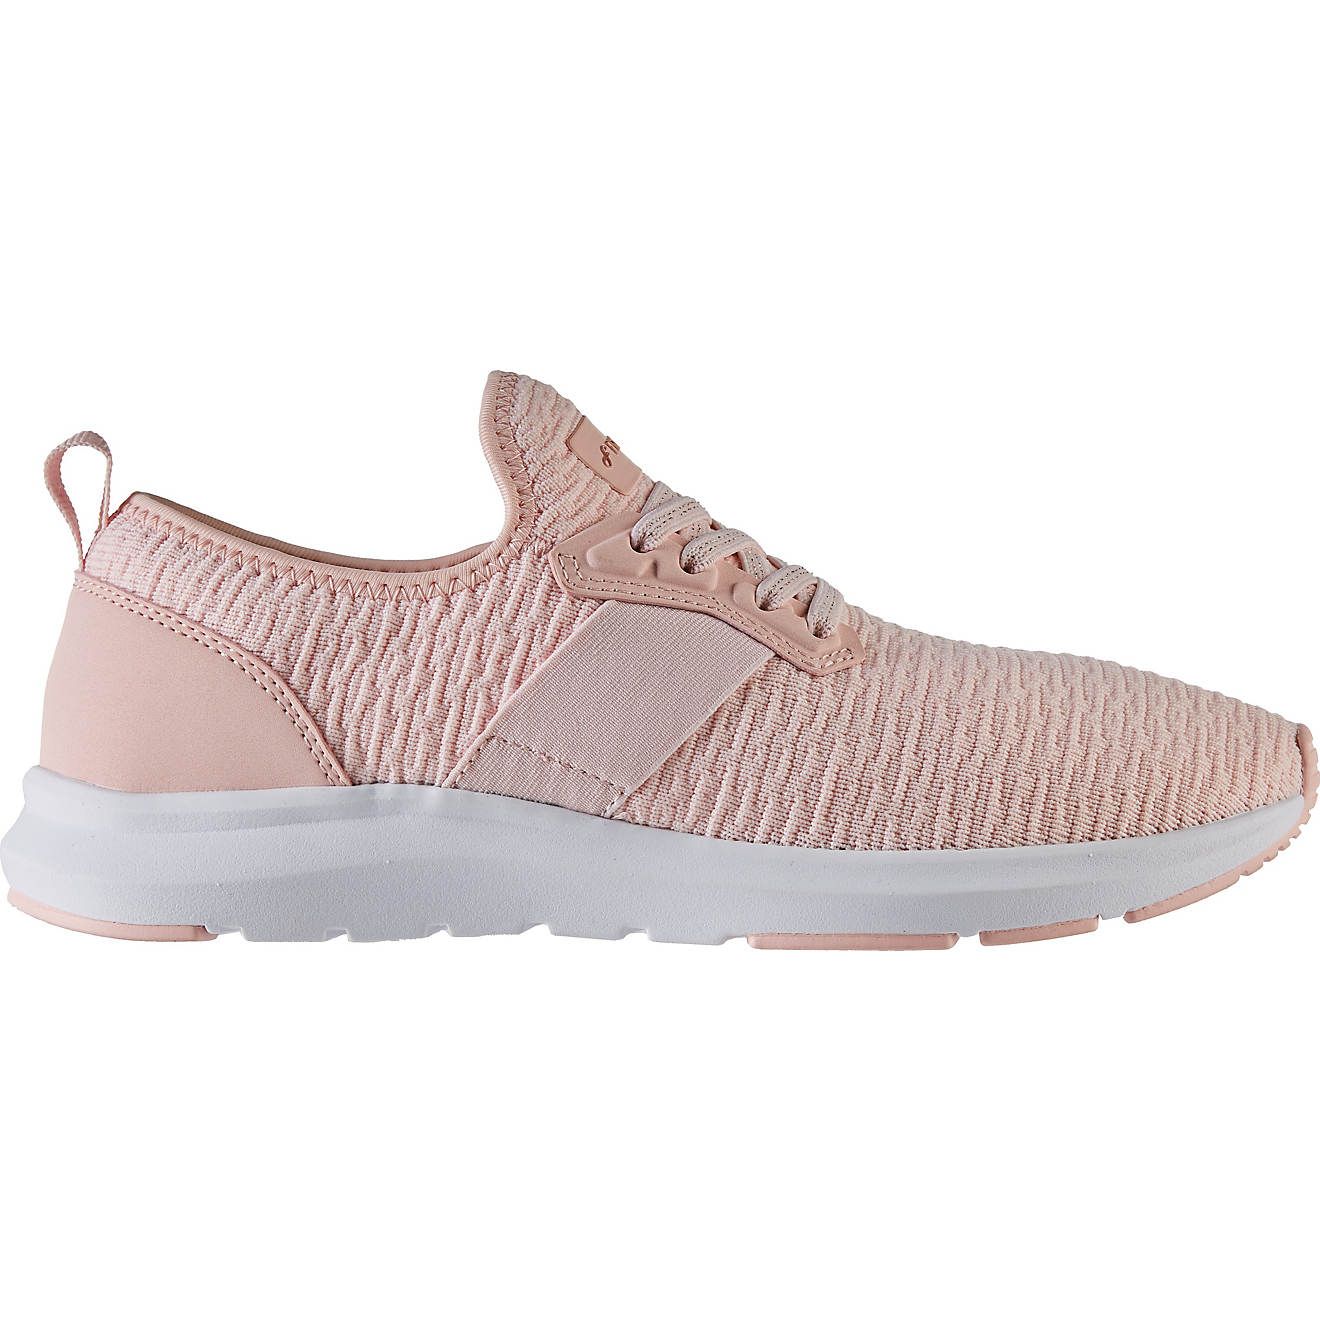 Freely Women's Lexi Slip-on Shoes | Academy Sports + Outdoor Affiliate